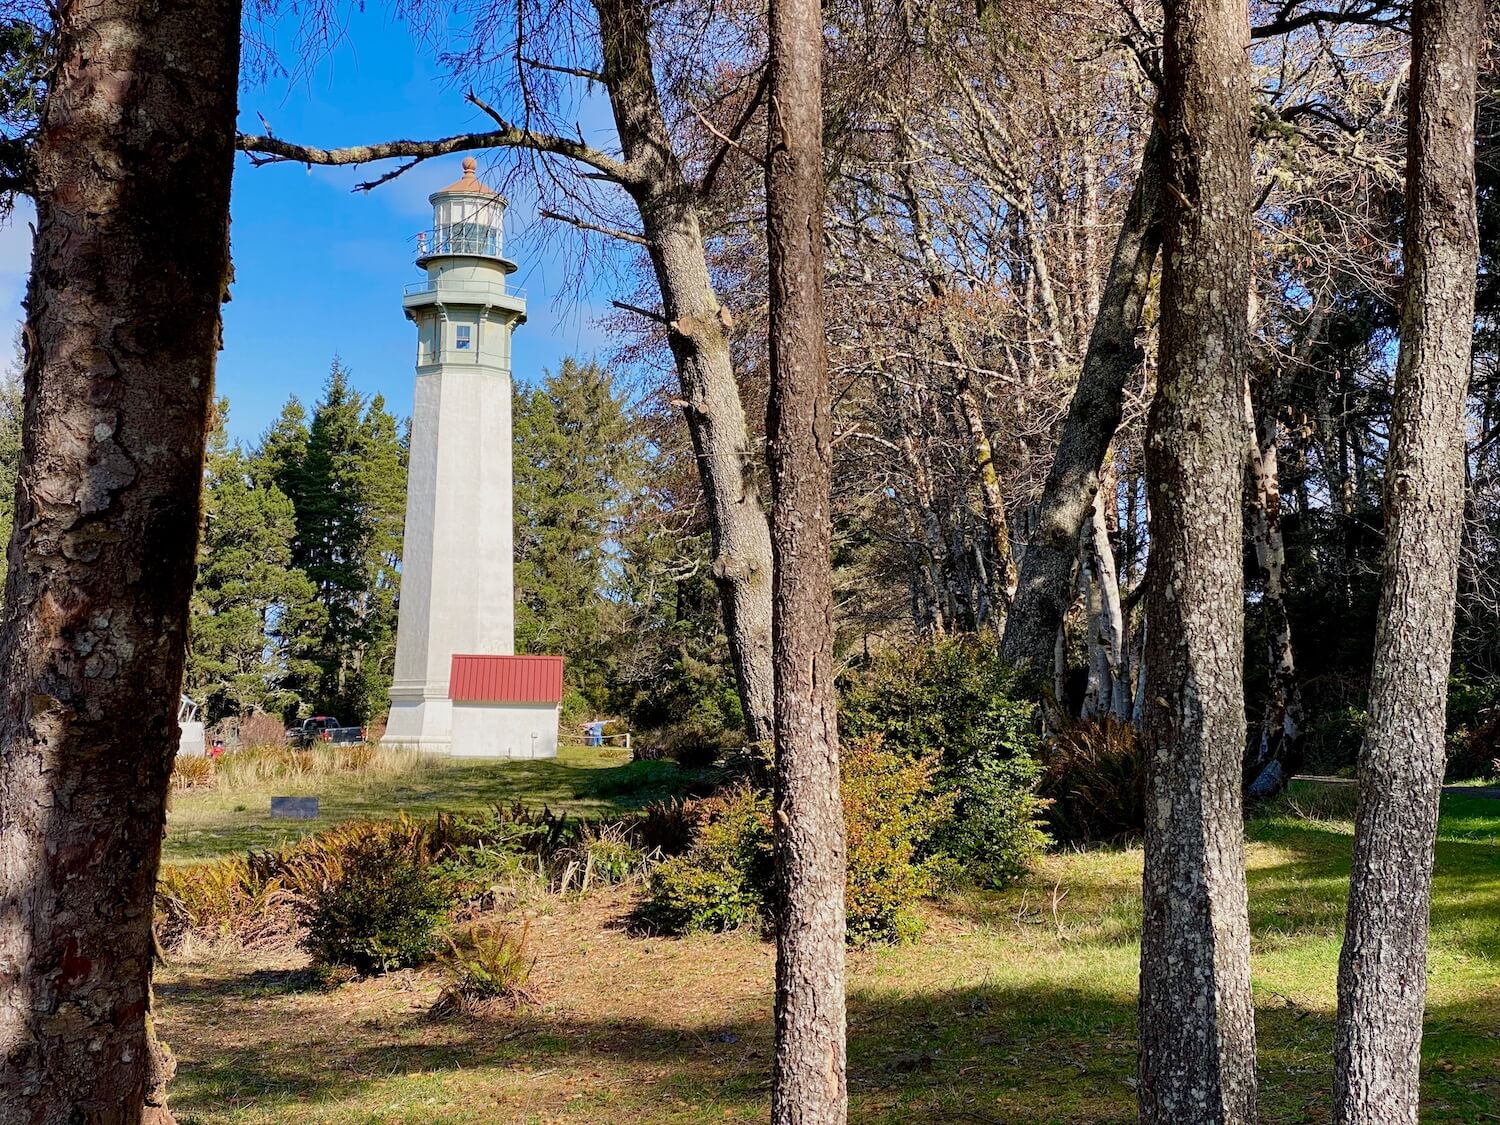 Westport lighthouse rises up just above the tree line of coastal cypress trees. The main column of the tower is stone white with a green top area housing the light and a red roof. The sky is blue in the surrounding forest has green grass. This is the highest lighthouse on the Washignton Coast.